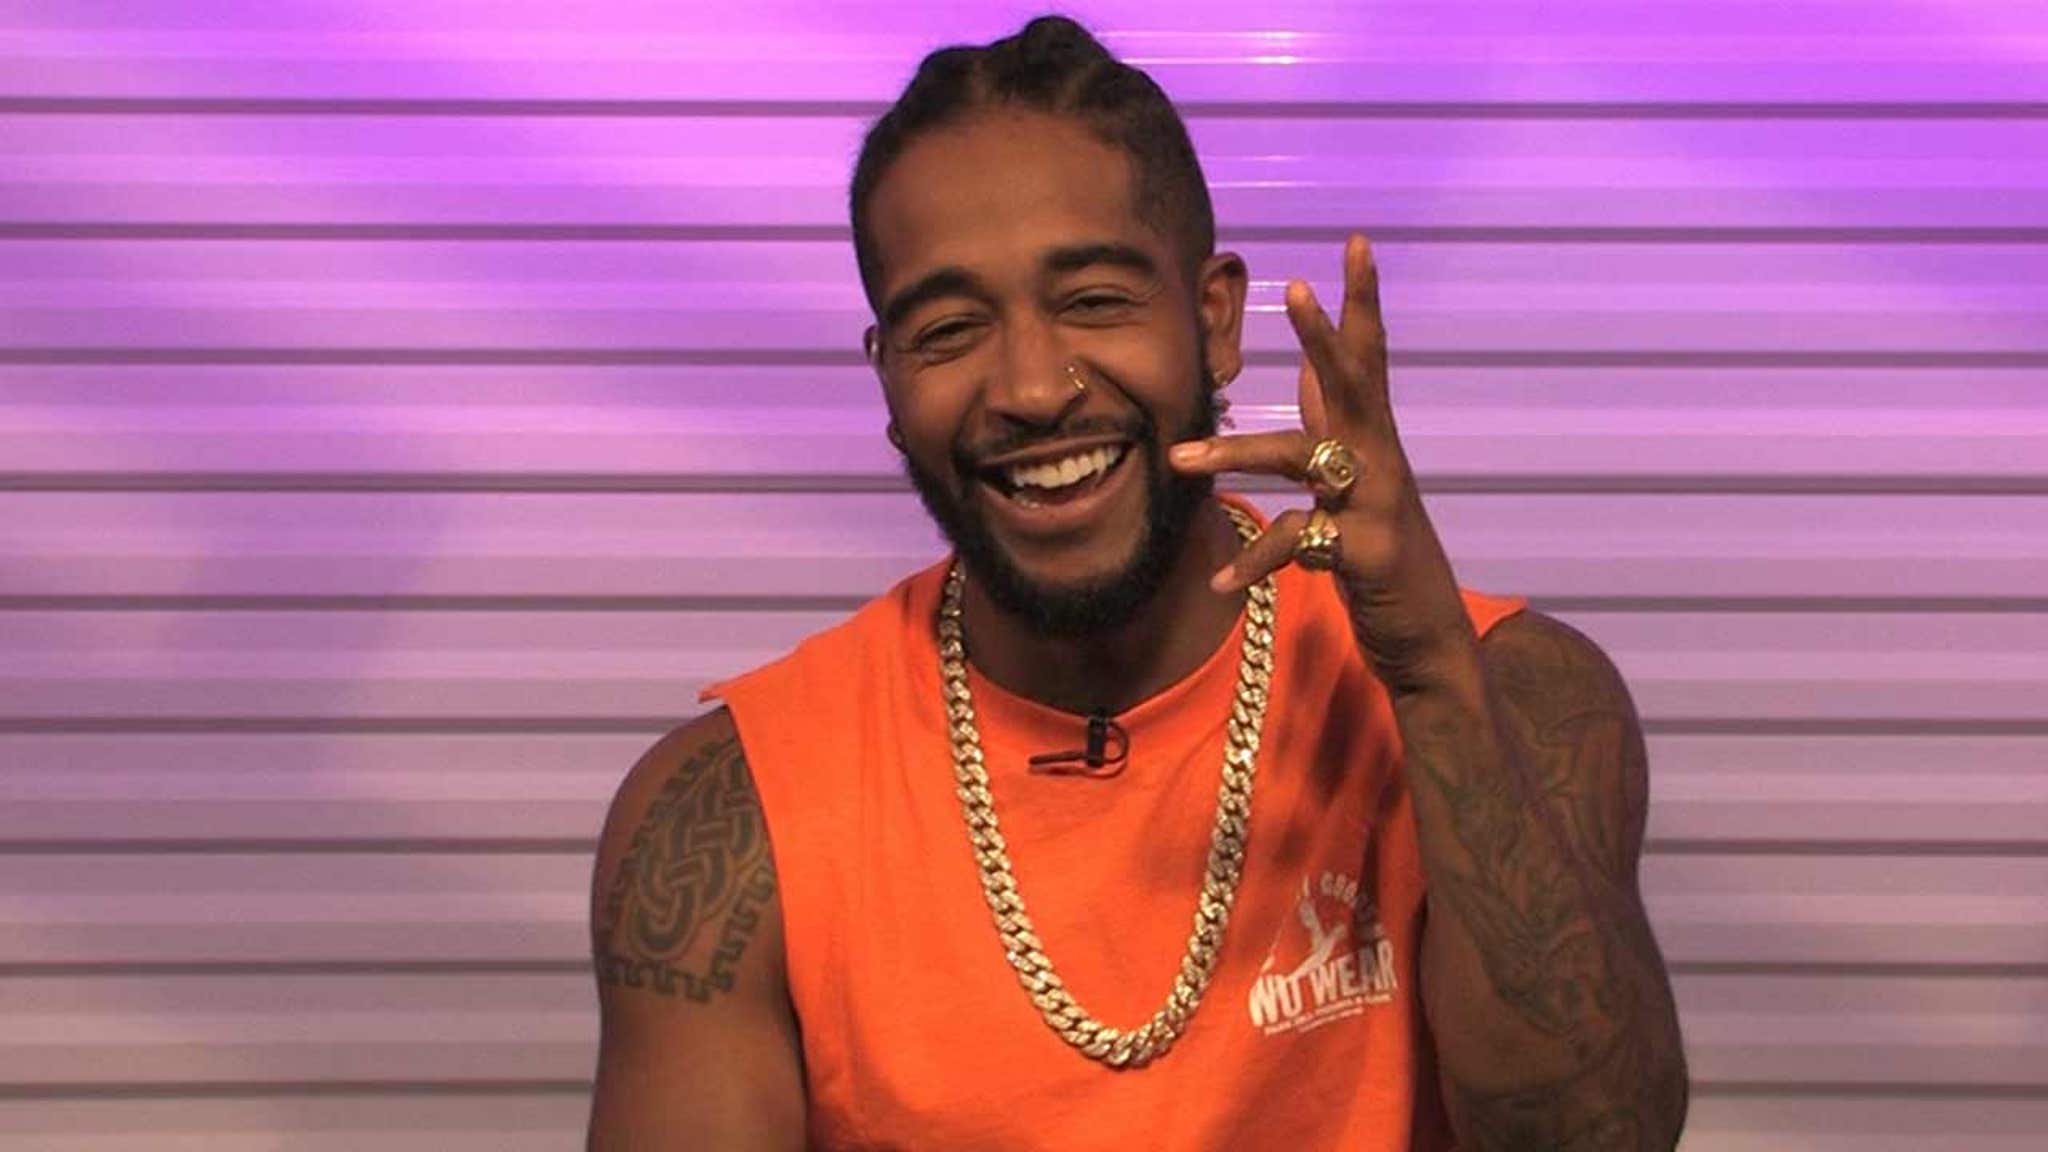 Omarion Says He Was Just Joking About Strict B2K Concert Rules, Everyone&ap...